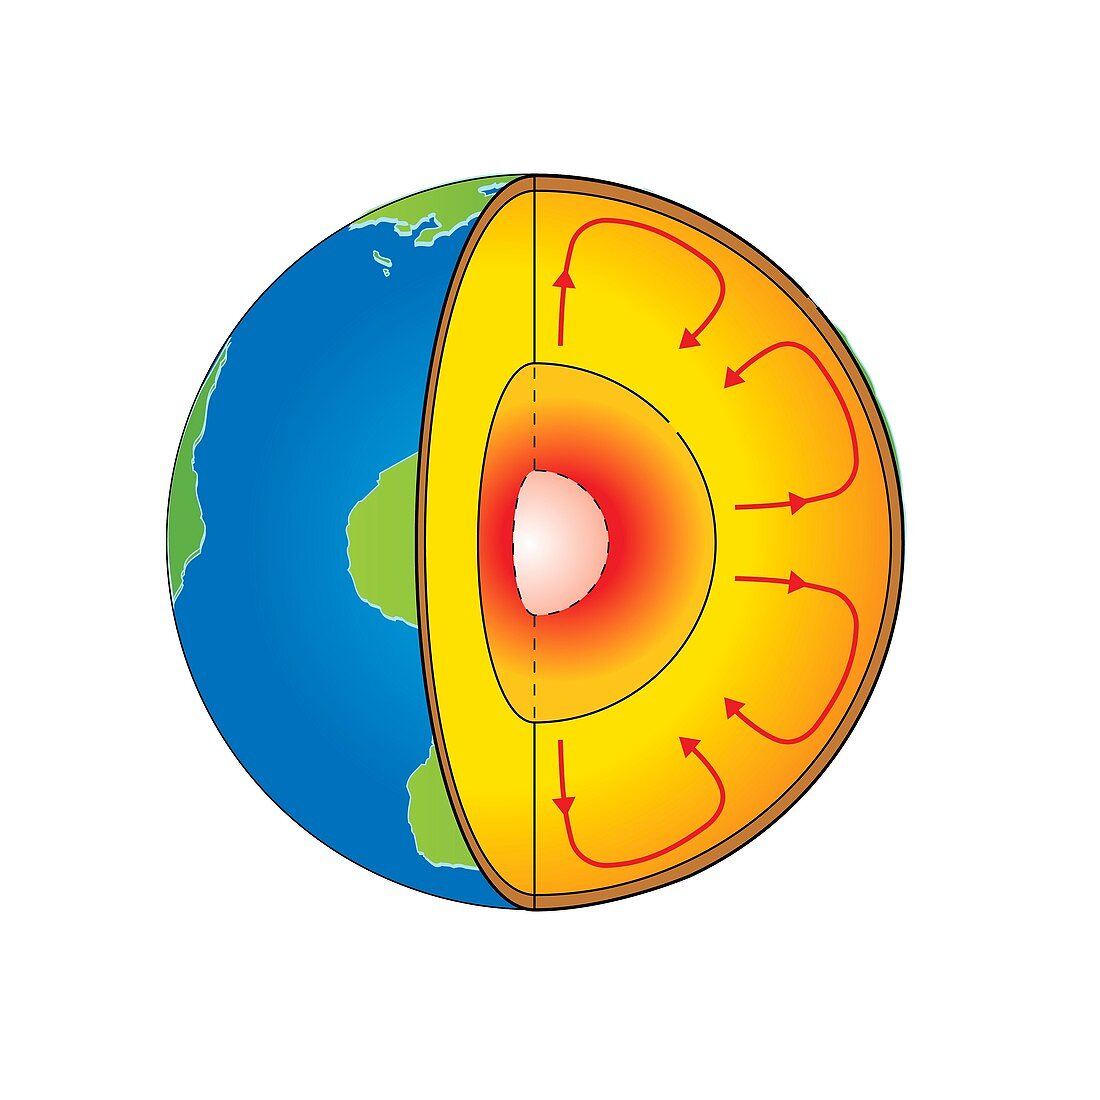 Earth's mantle convection, illustration